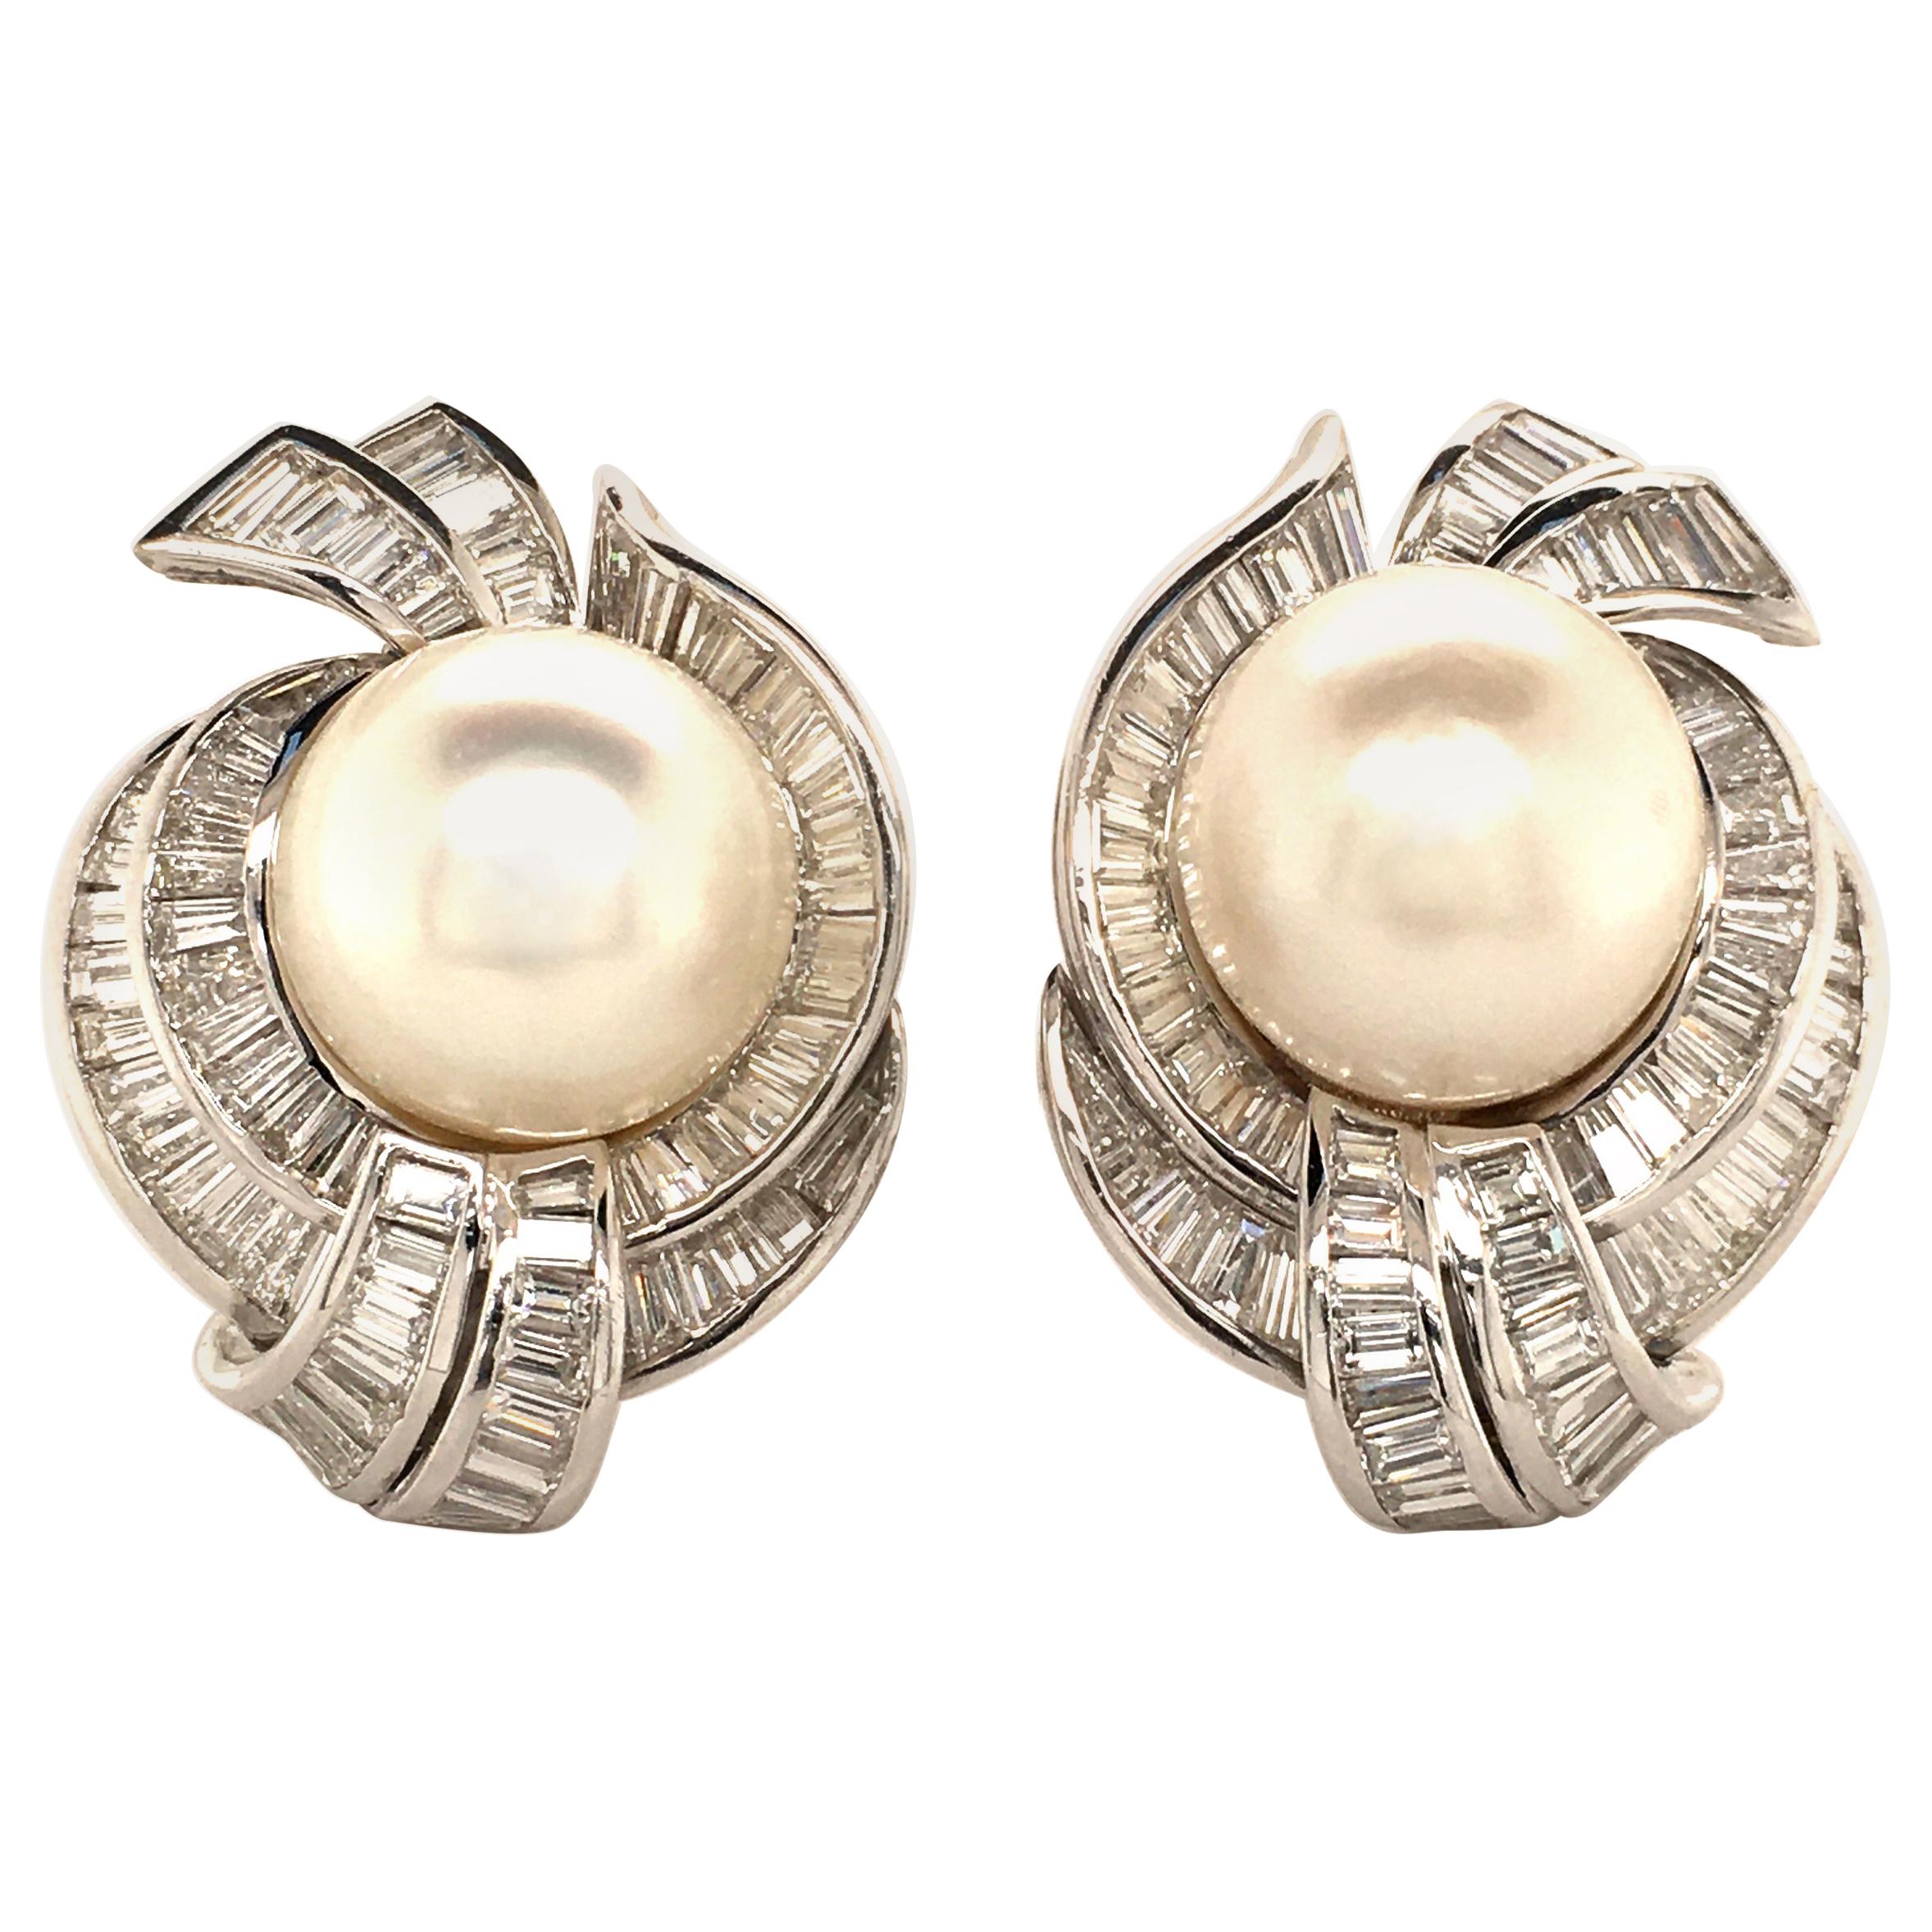 Stunning South Sea Cultured Pearls Earrings in White Gold 750 with Diamonds For Sale